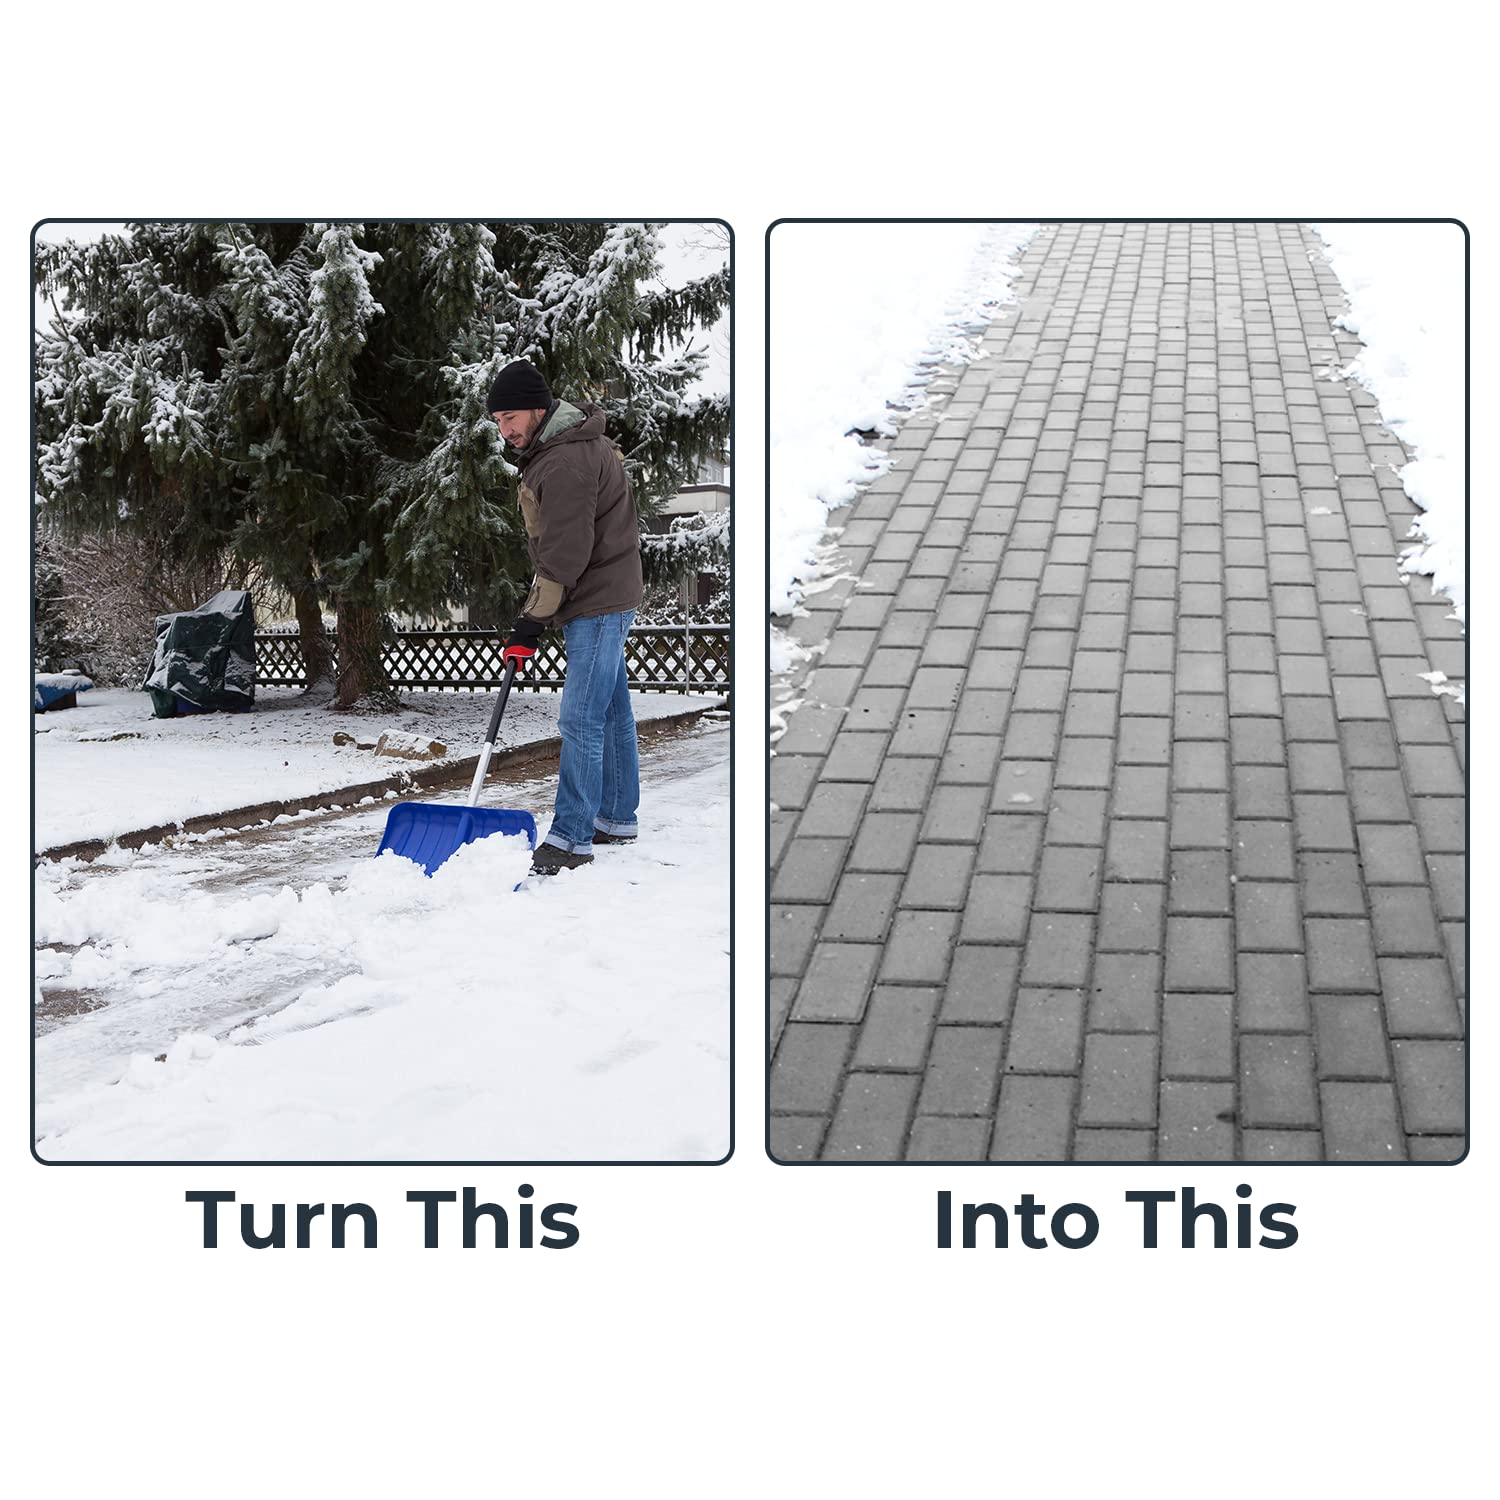 EconoHome Snow Melting Mat, Large Heated Ice Melter for Pavers, Concrete, Walkways, Driveways, Sidewalk & Outdoor Steps, Auto Thermal Heating Elements, Optional Over Current Protection & GFCI